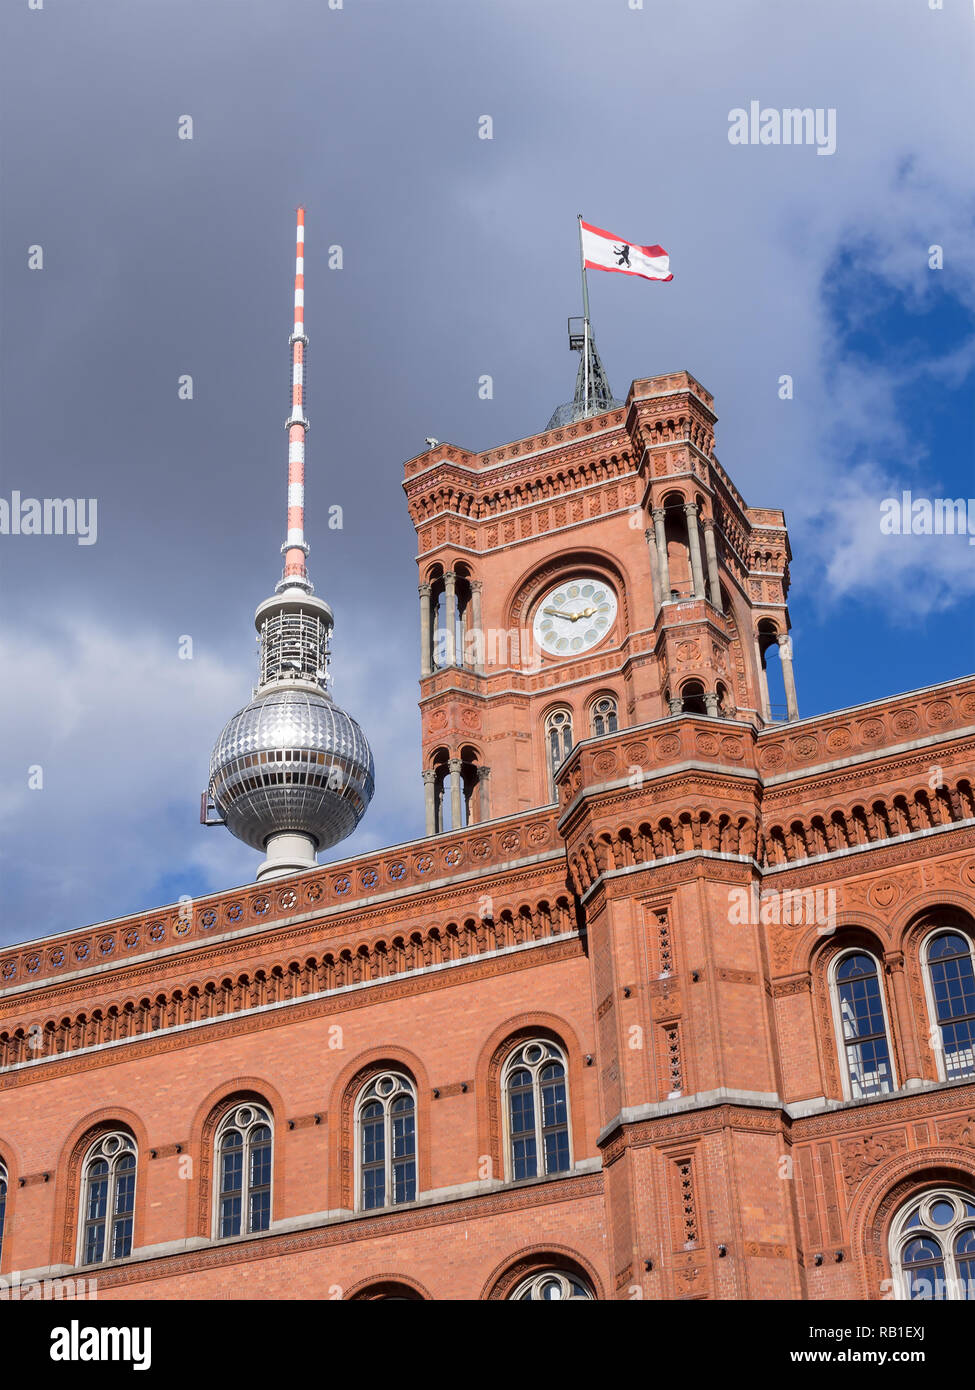 BERLIN, GERMANY - OCTOBER 8, 2017: Famous Rotes Rathaus, Meaning Red City Hall In German Language, With TV Tower In The Background In Berlin Stock Photo